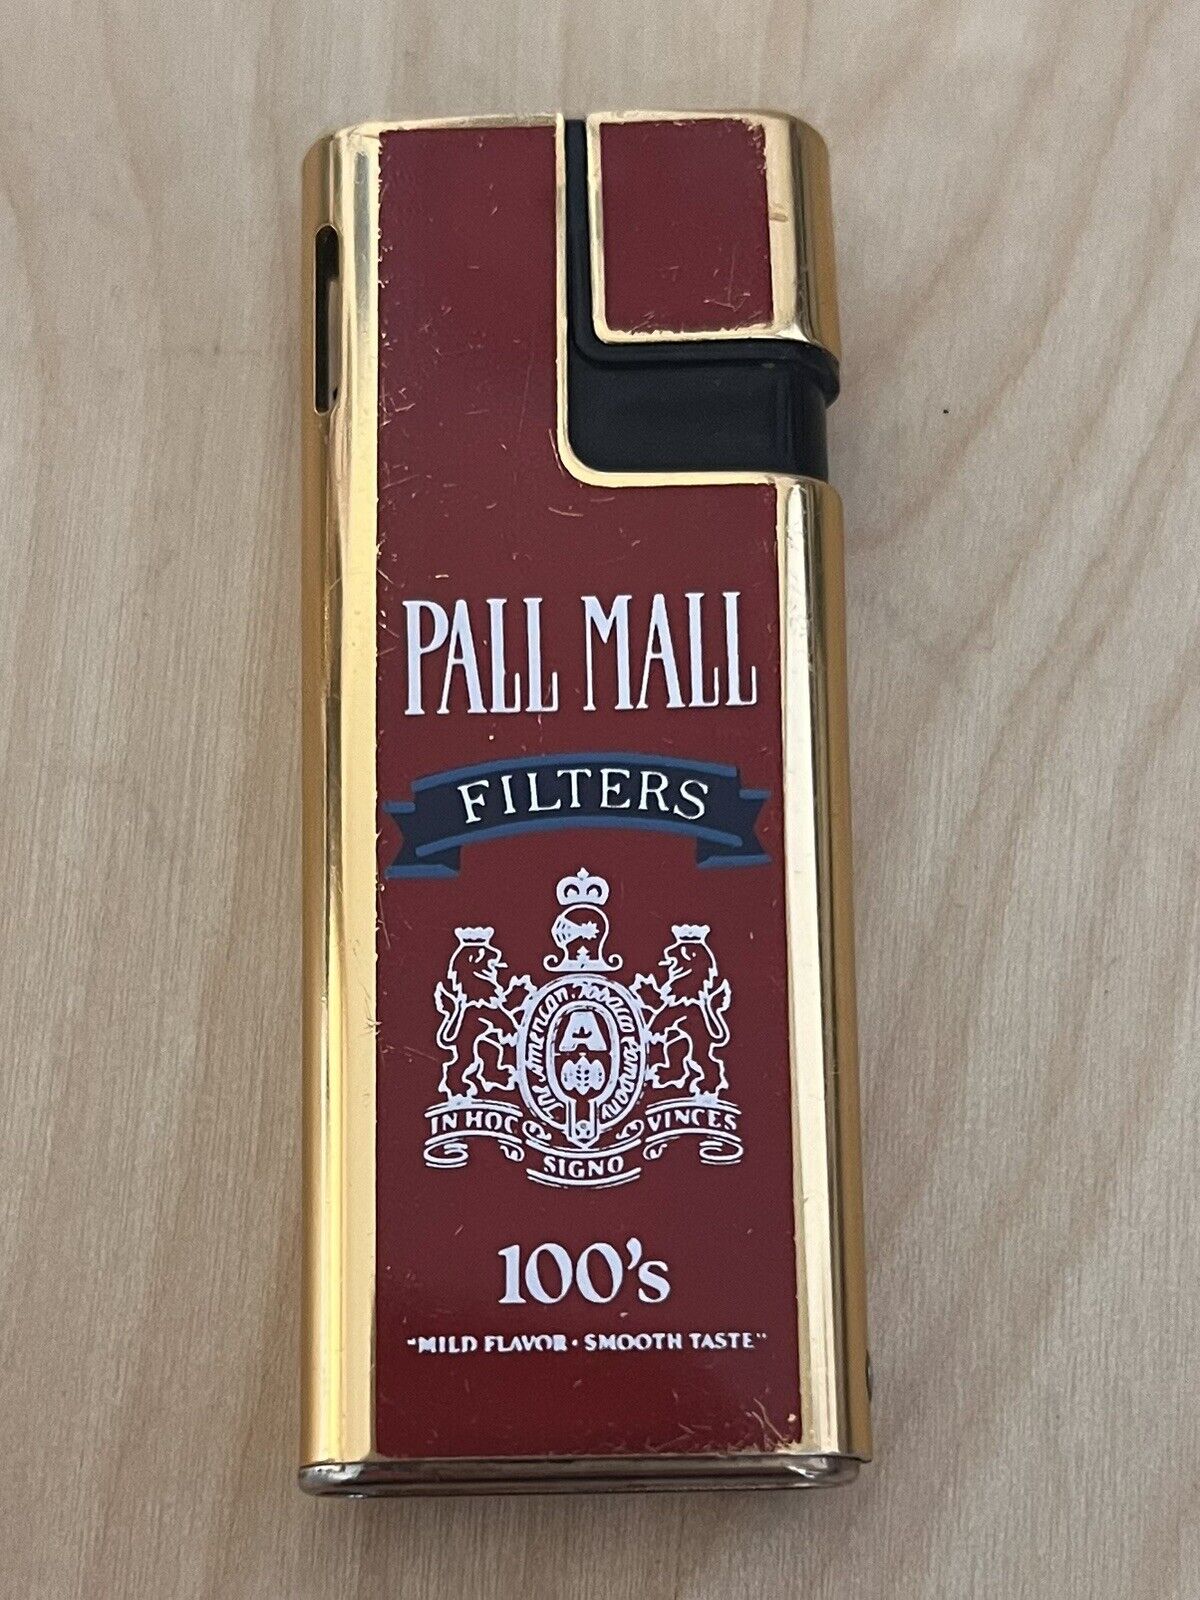 Vintage Pall Mall Cigarettes Lighter - Collectible Retro Smoking Accessory